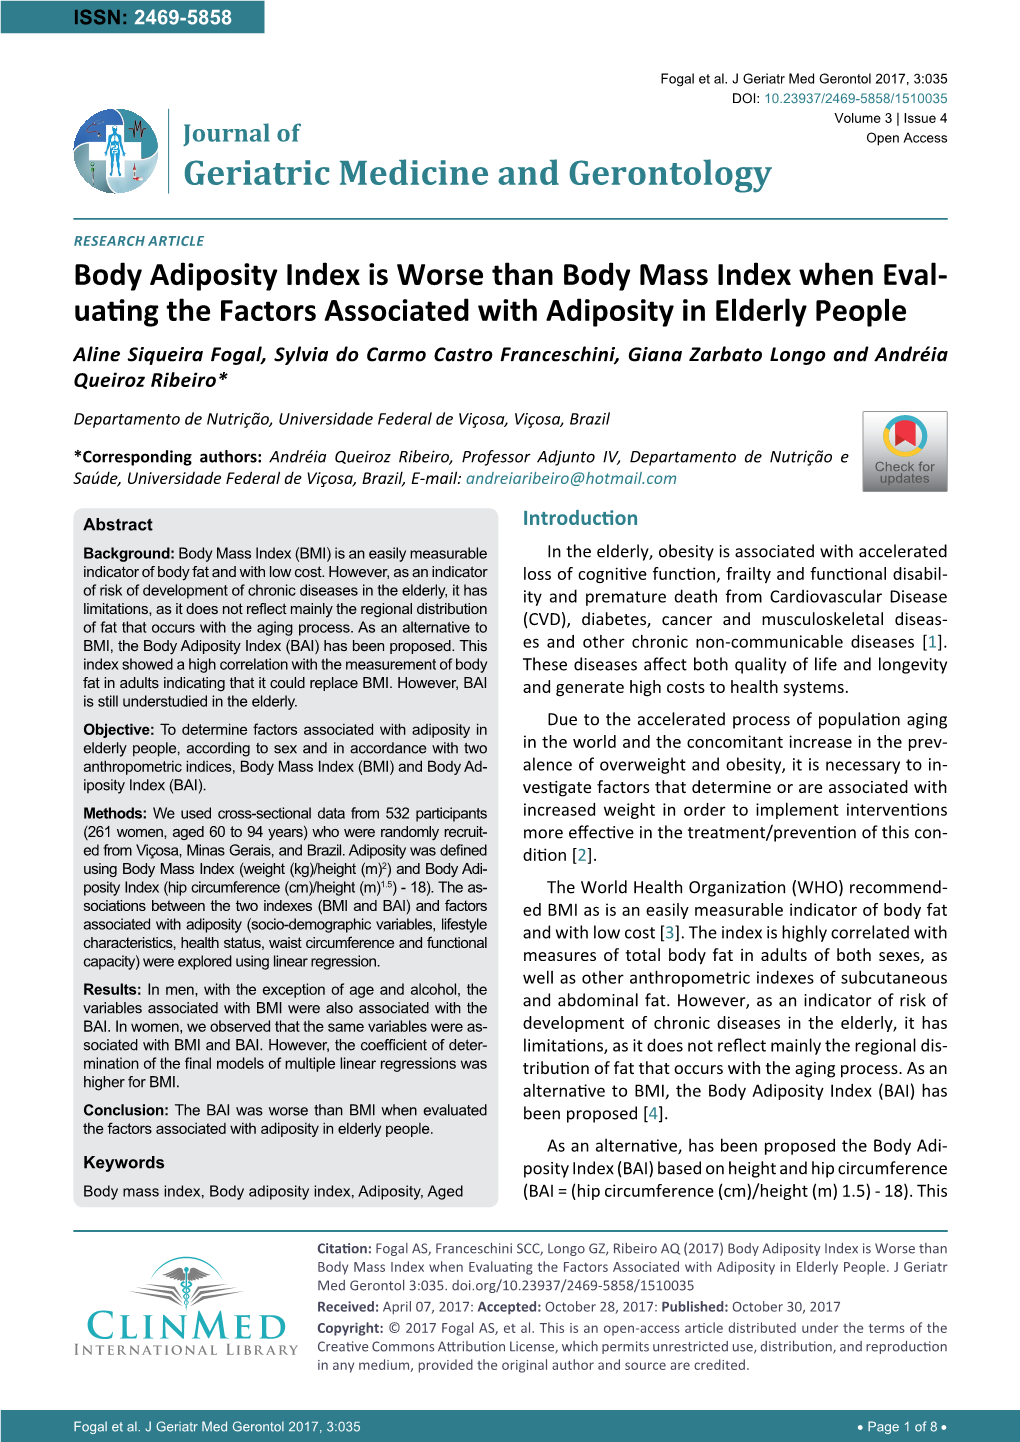 Body Adiposity Index Is Worse Than Body Mass Index When Eval